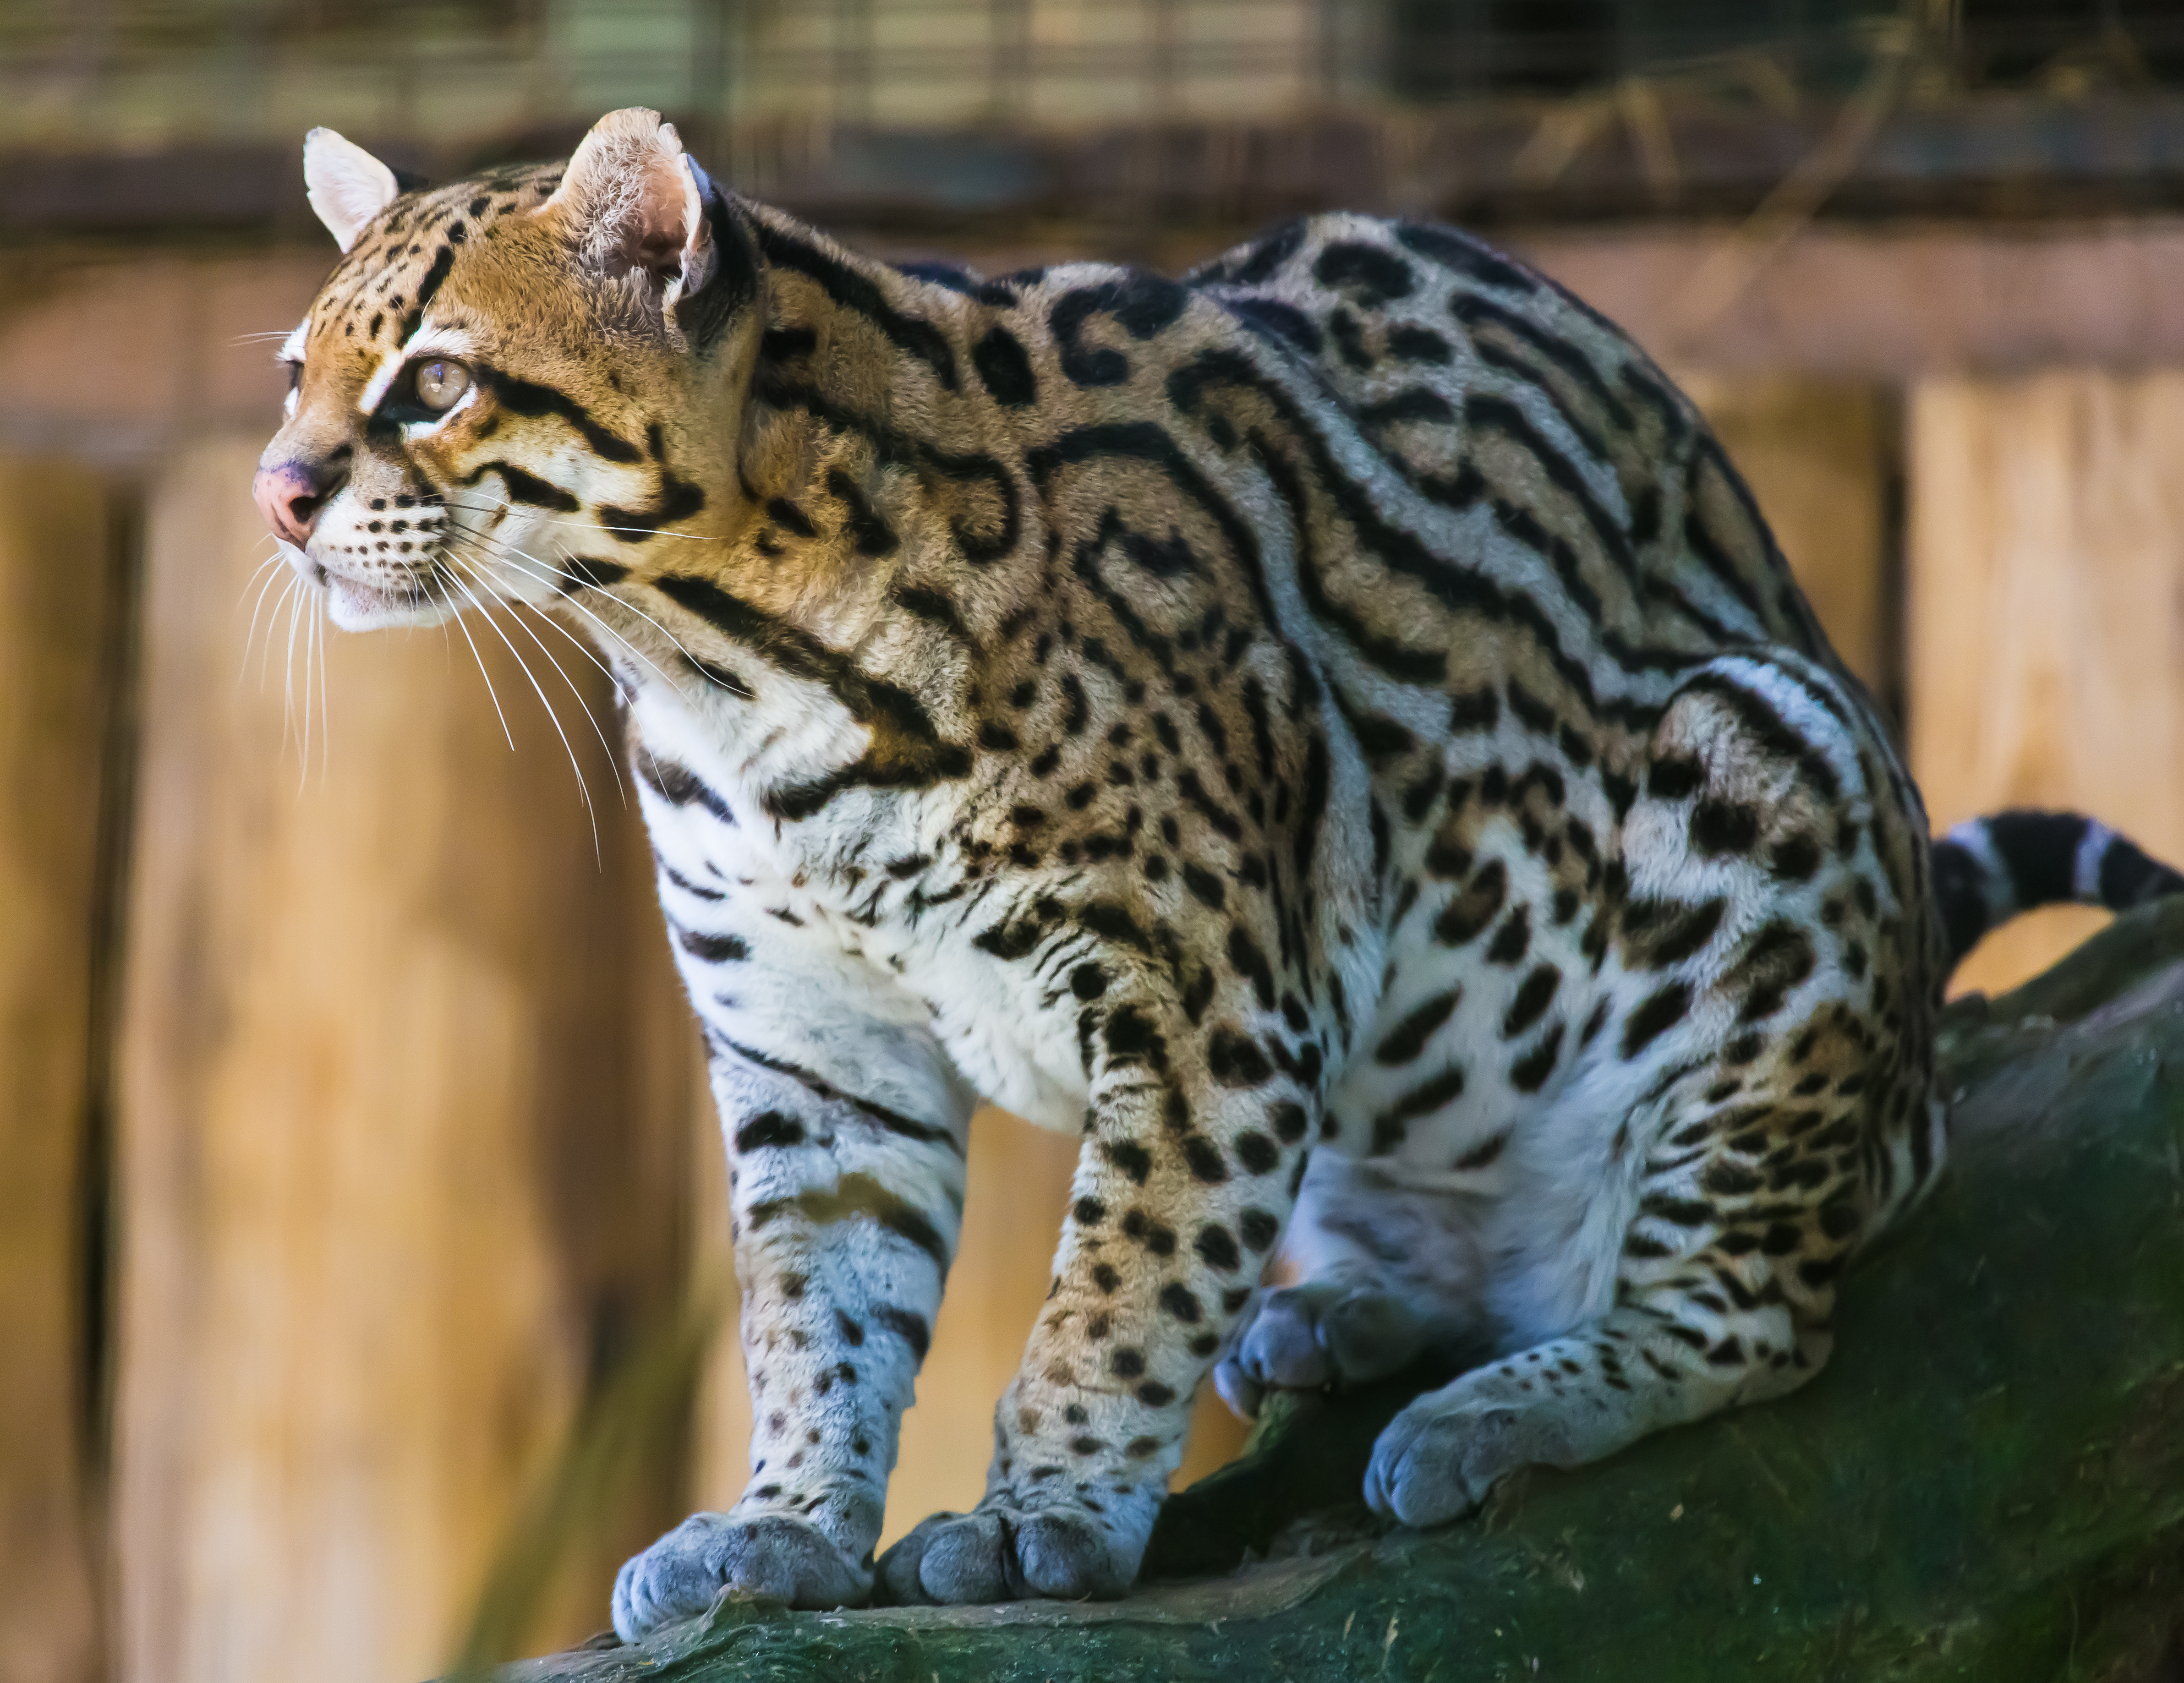 What family is the ocelot in?